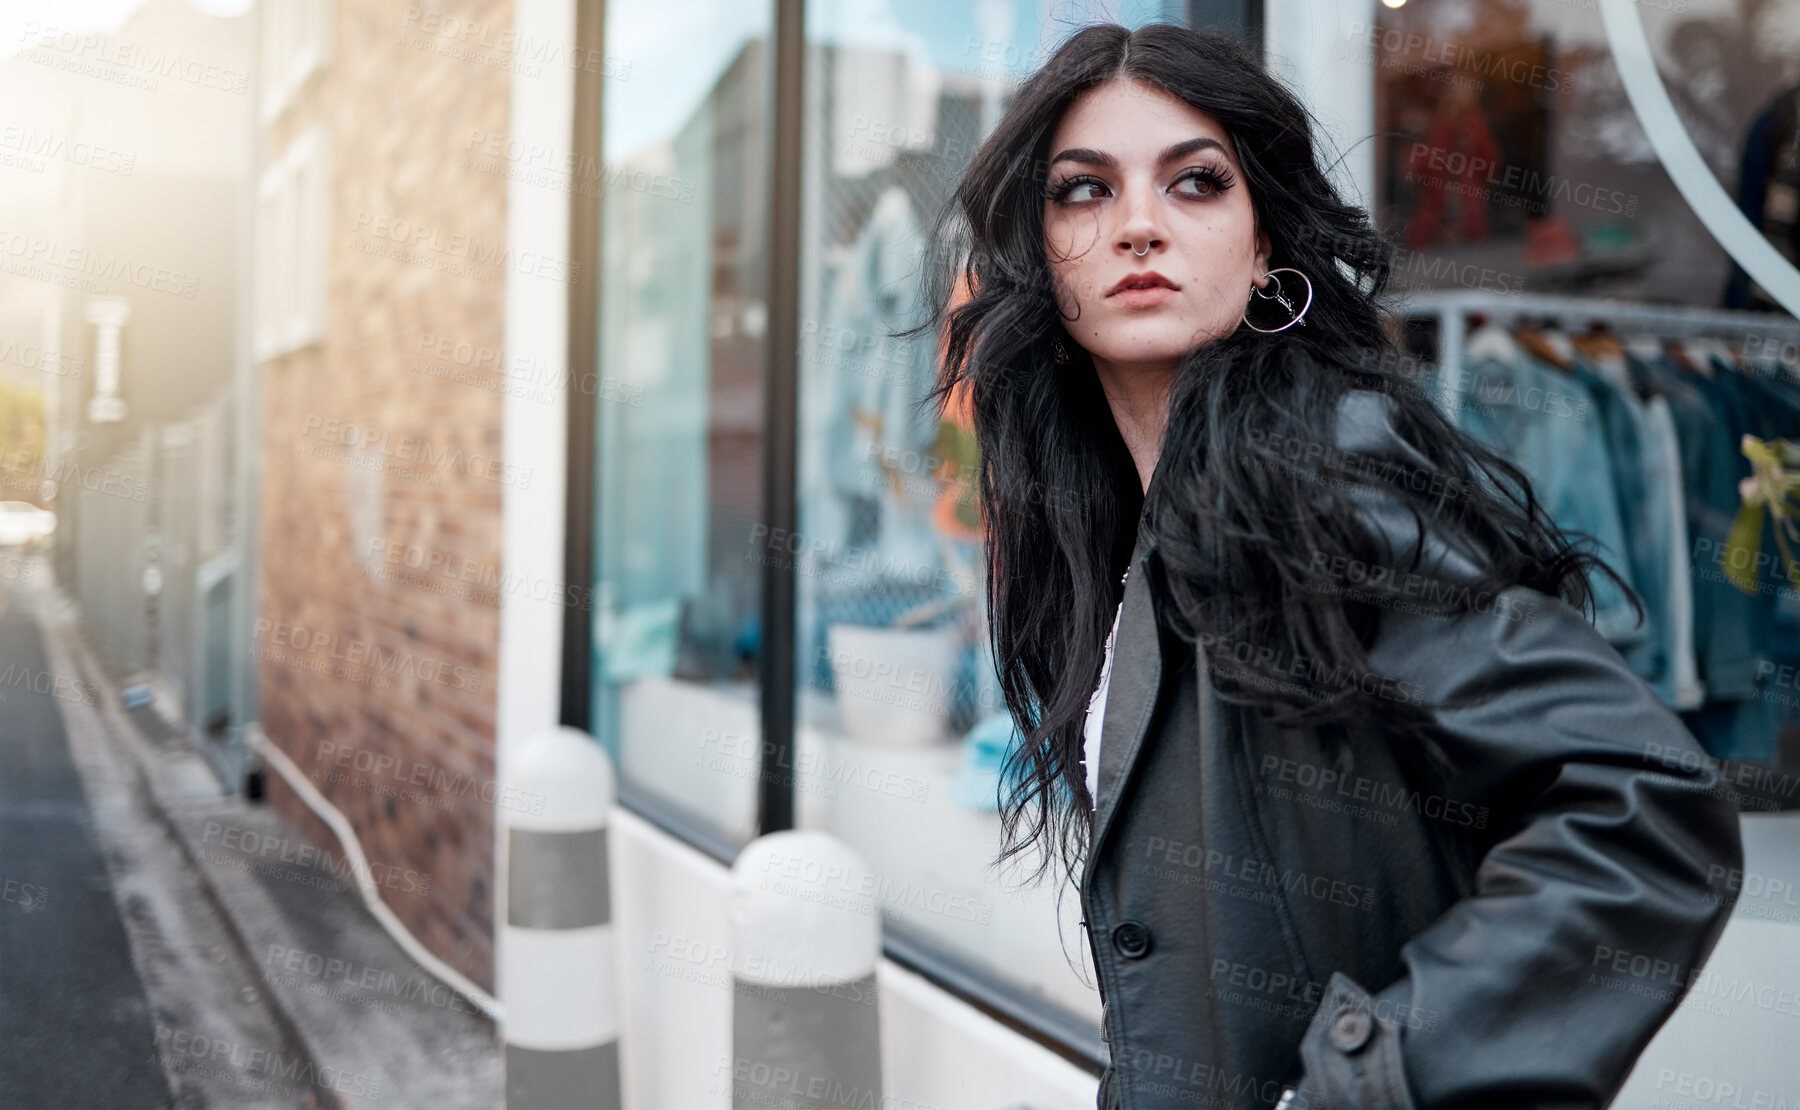 Buy stock photo Urban fashion, style and a woman on the street at shop window, punk streetwear outside designer boutique. Beauty, make up and gen z fashion model or rock influencer in the city at store window.